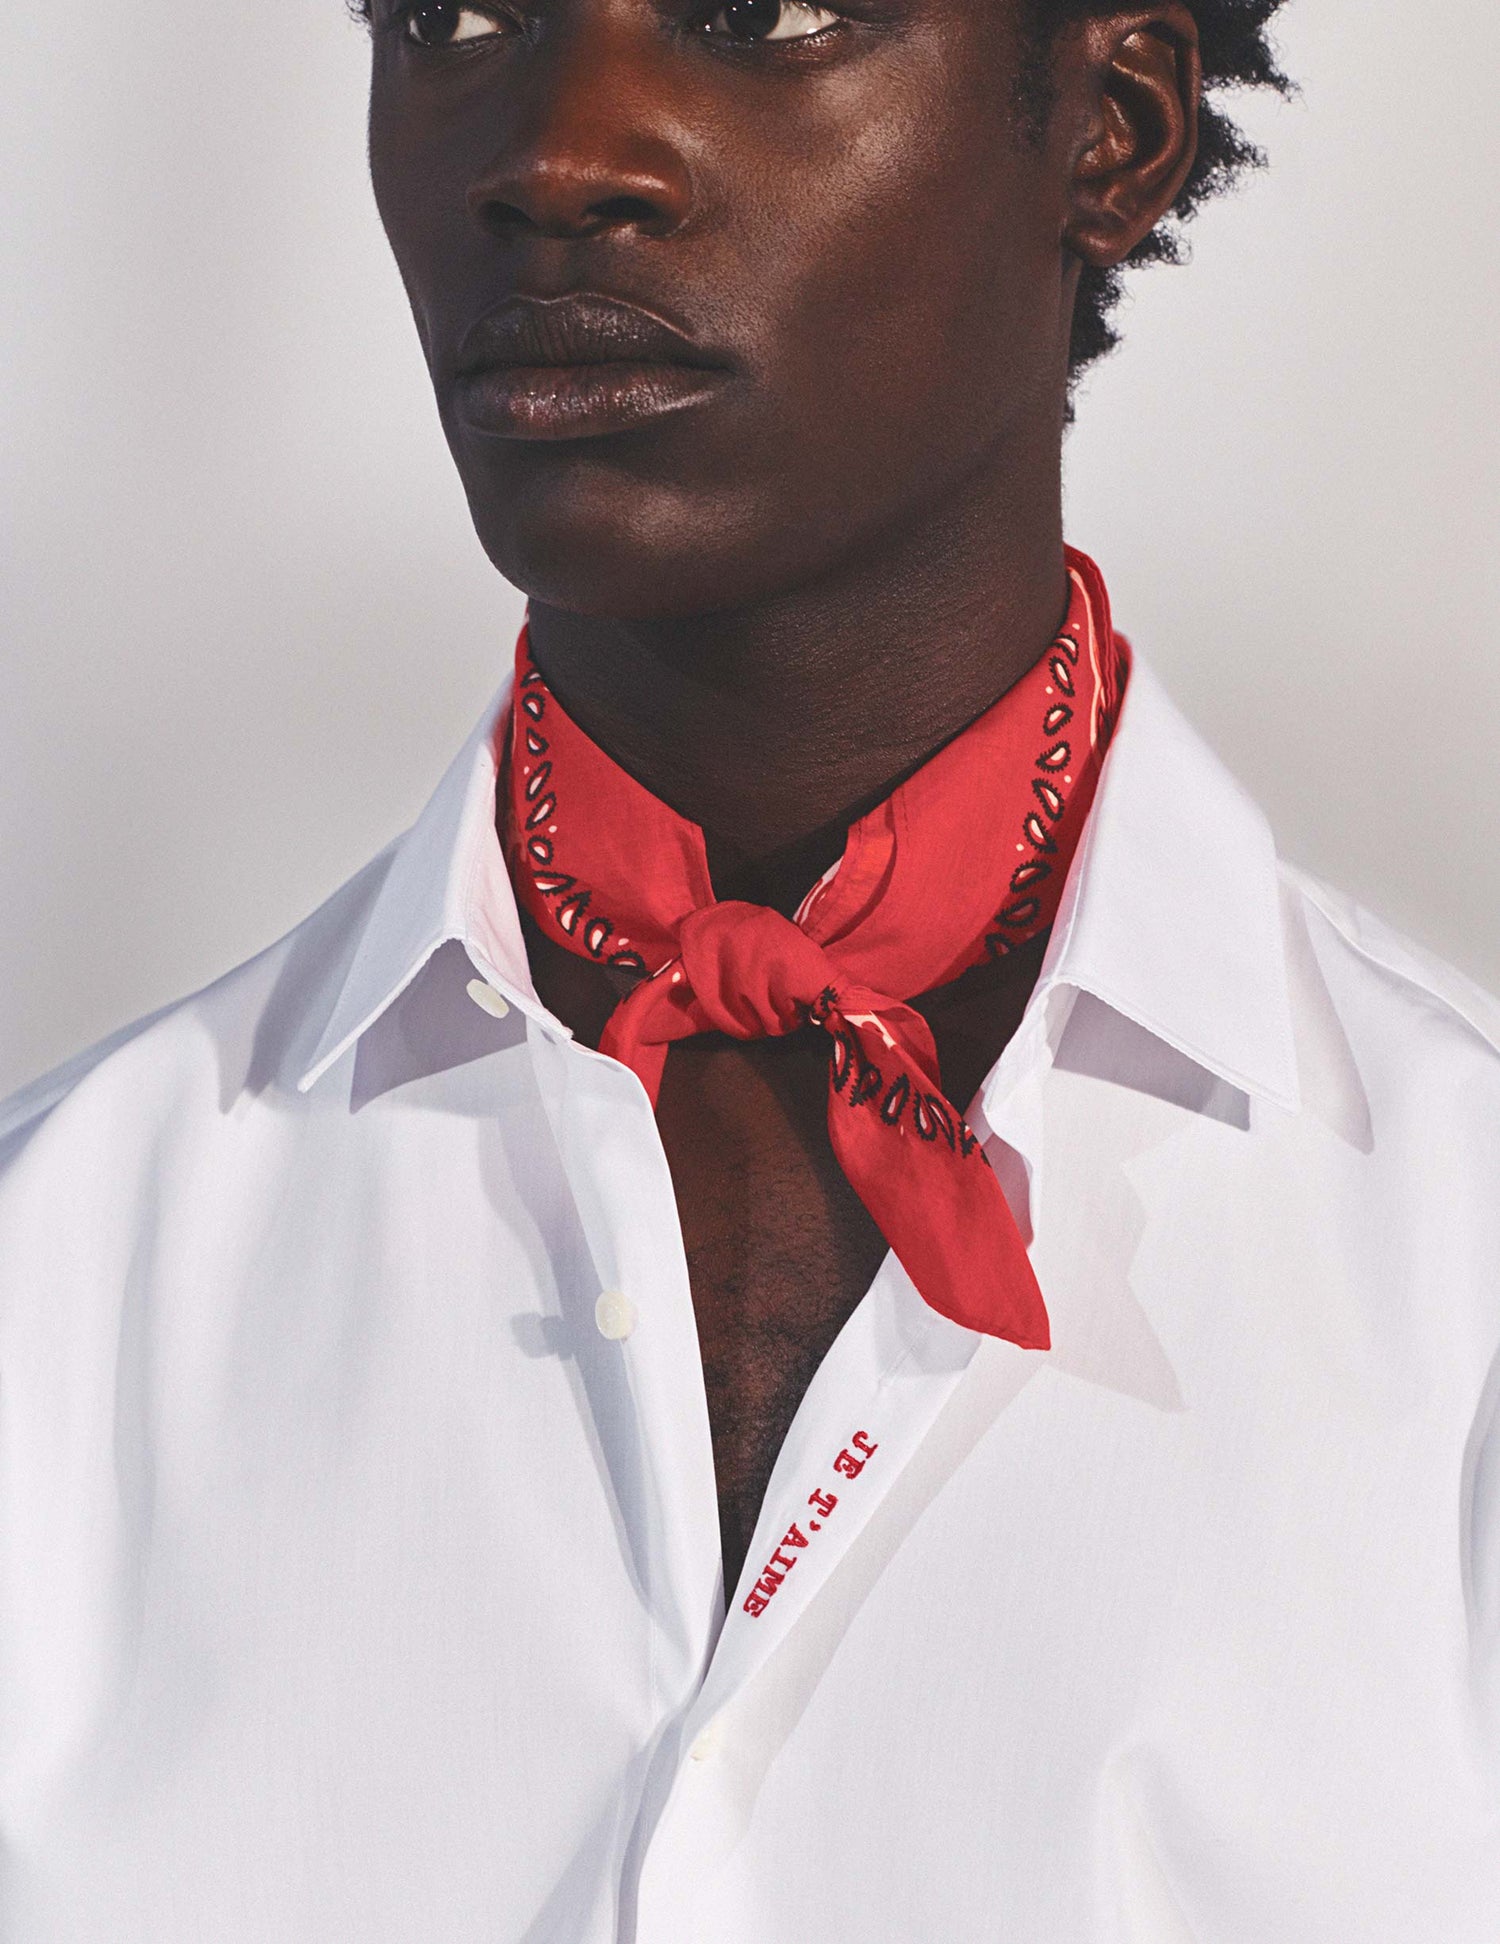 White "Je t'aime" shirt with red embroidery - Poplin - Figaret Collar